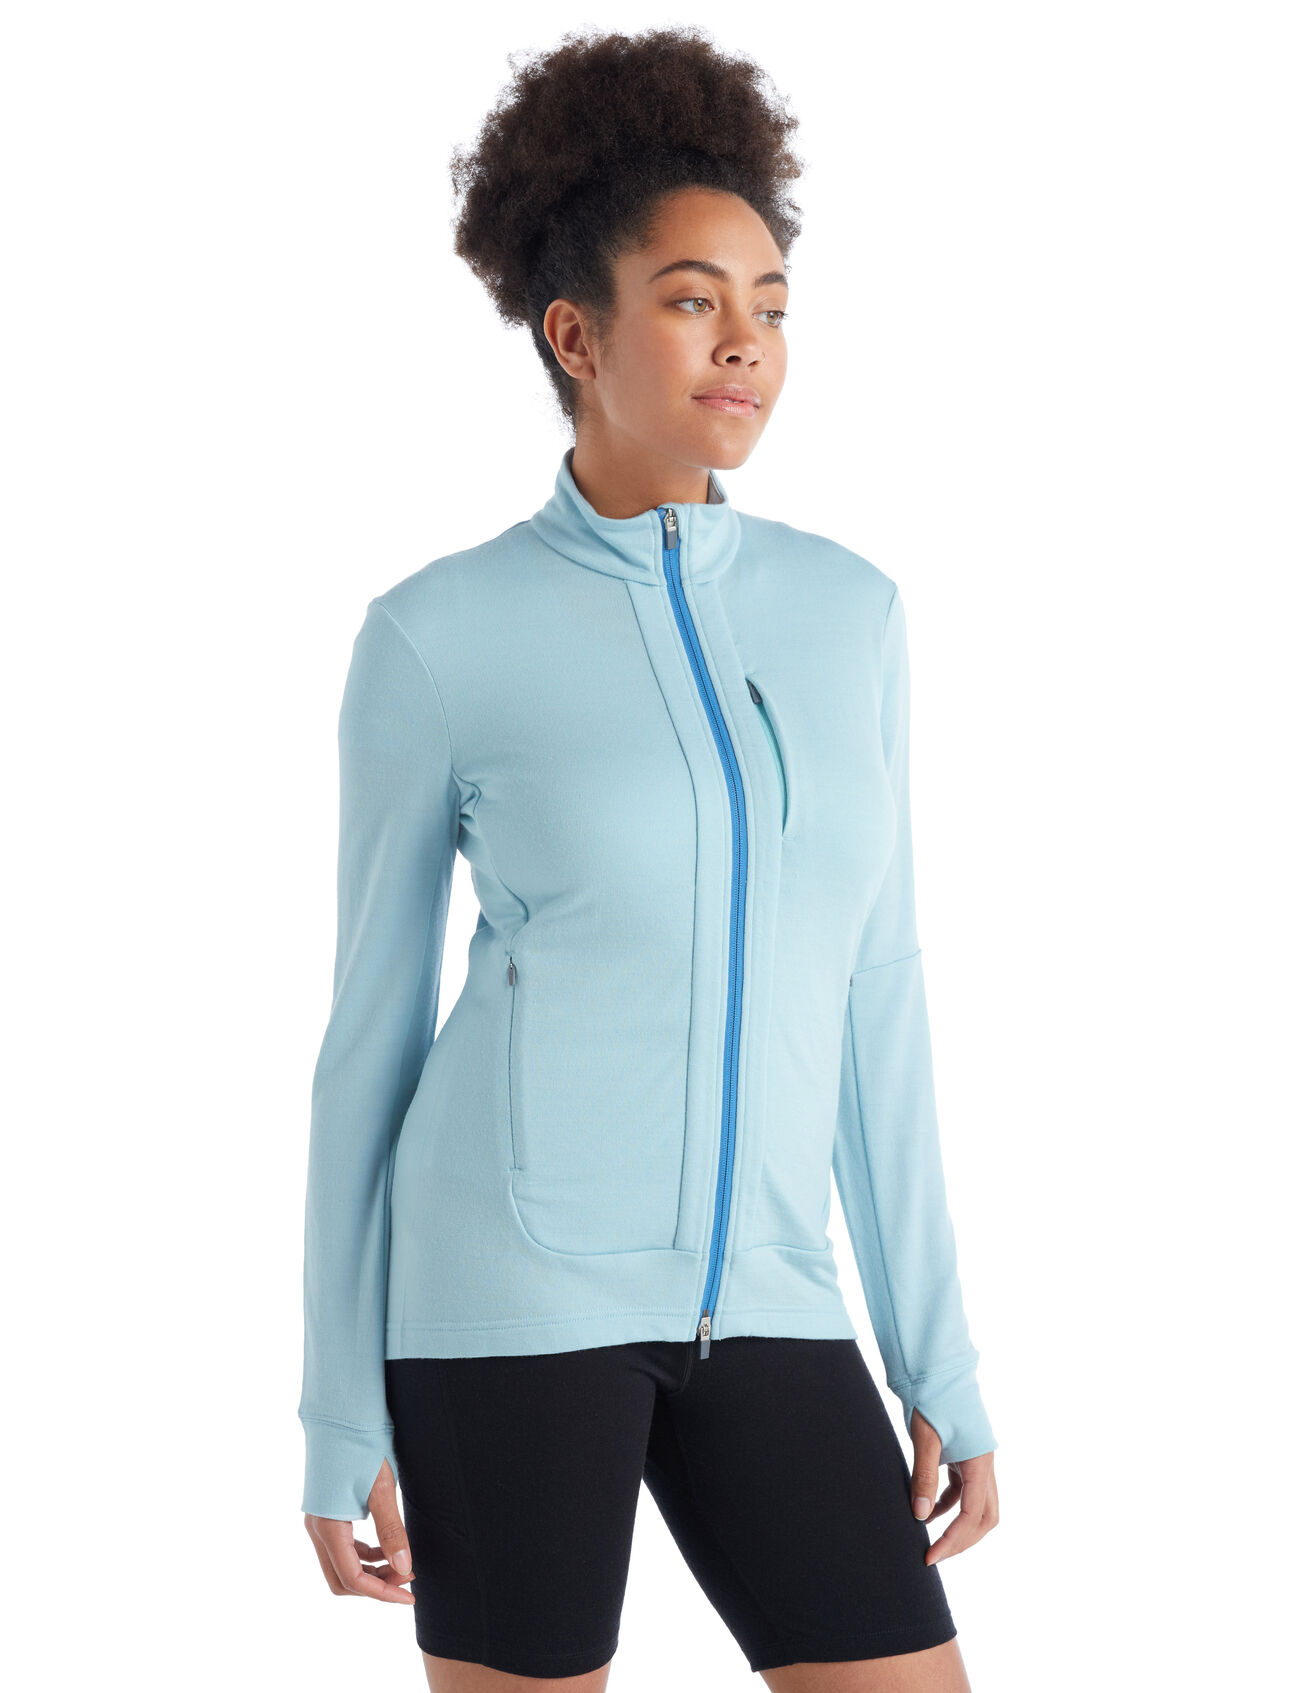 Womens Merino Quantum III Long Sleeve Zip  A 100% merino wool mid layer ideal for technical mountain adventures, the Quantum III Long Sleeve Zip helps regulate your body temperature when you're on the move.